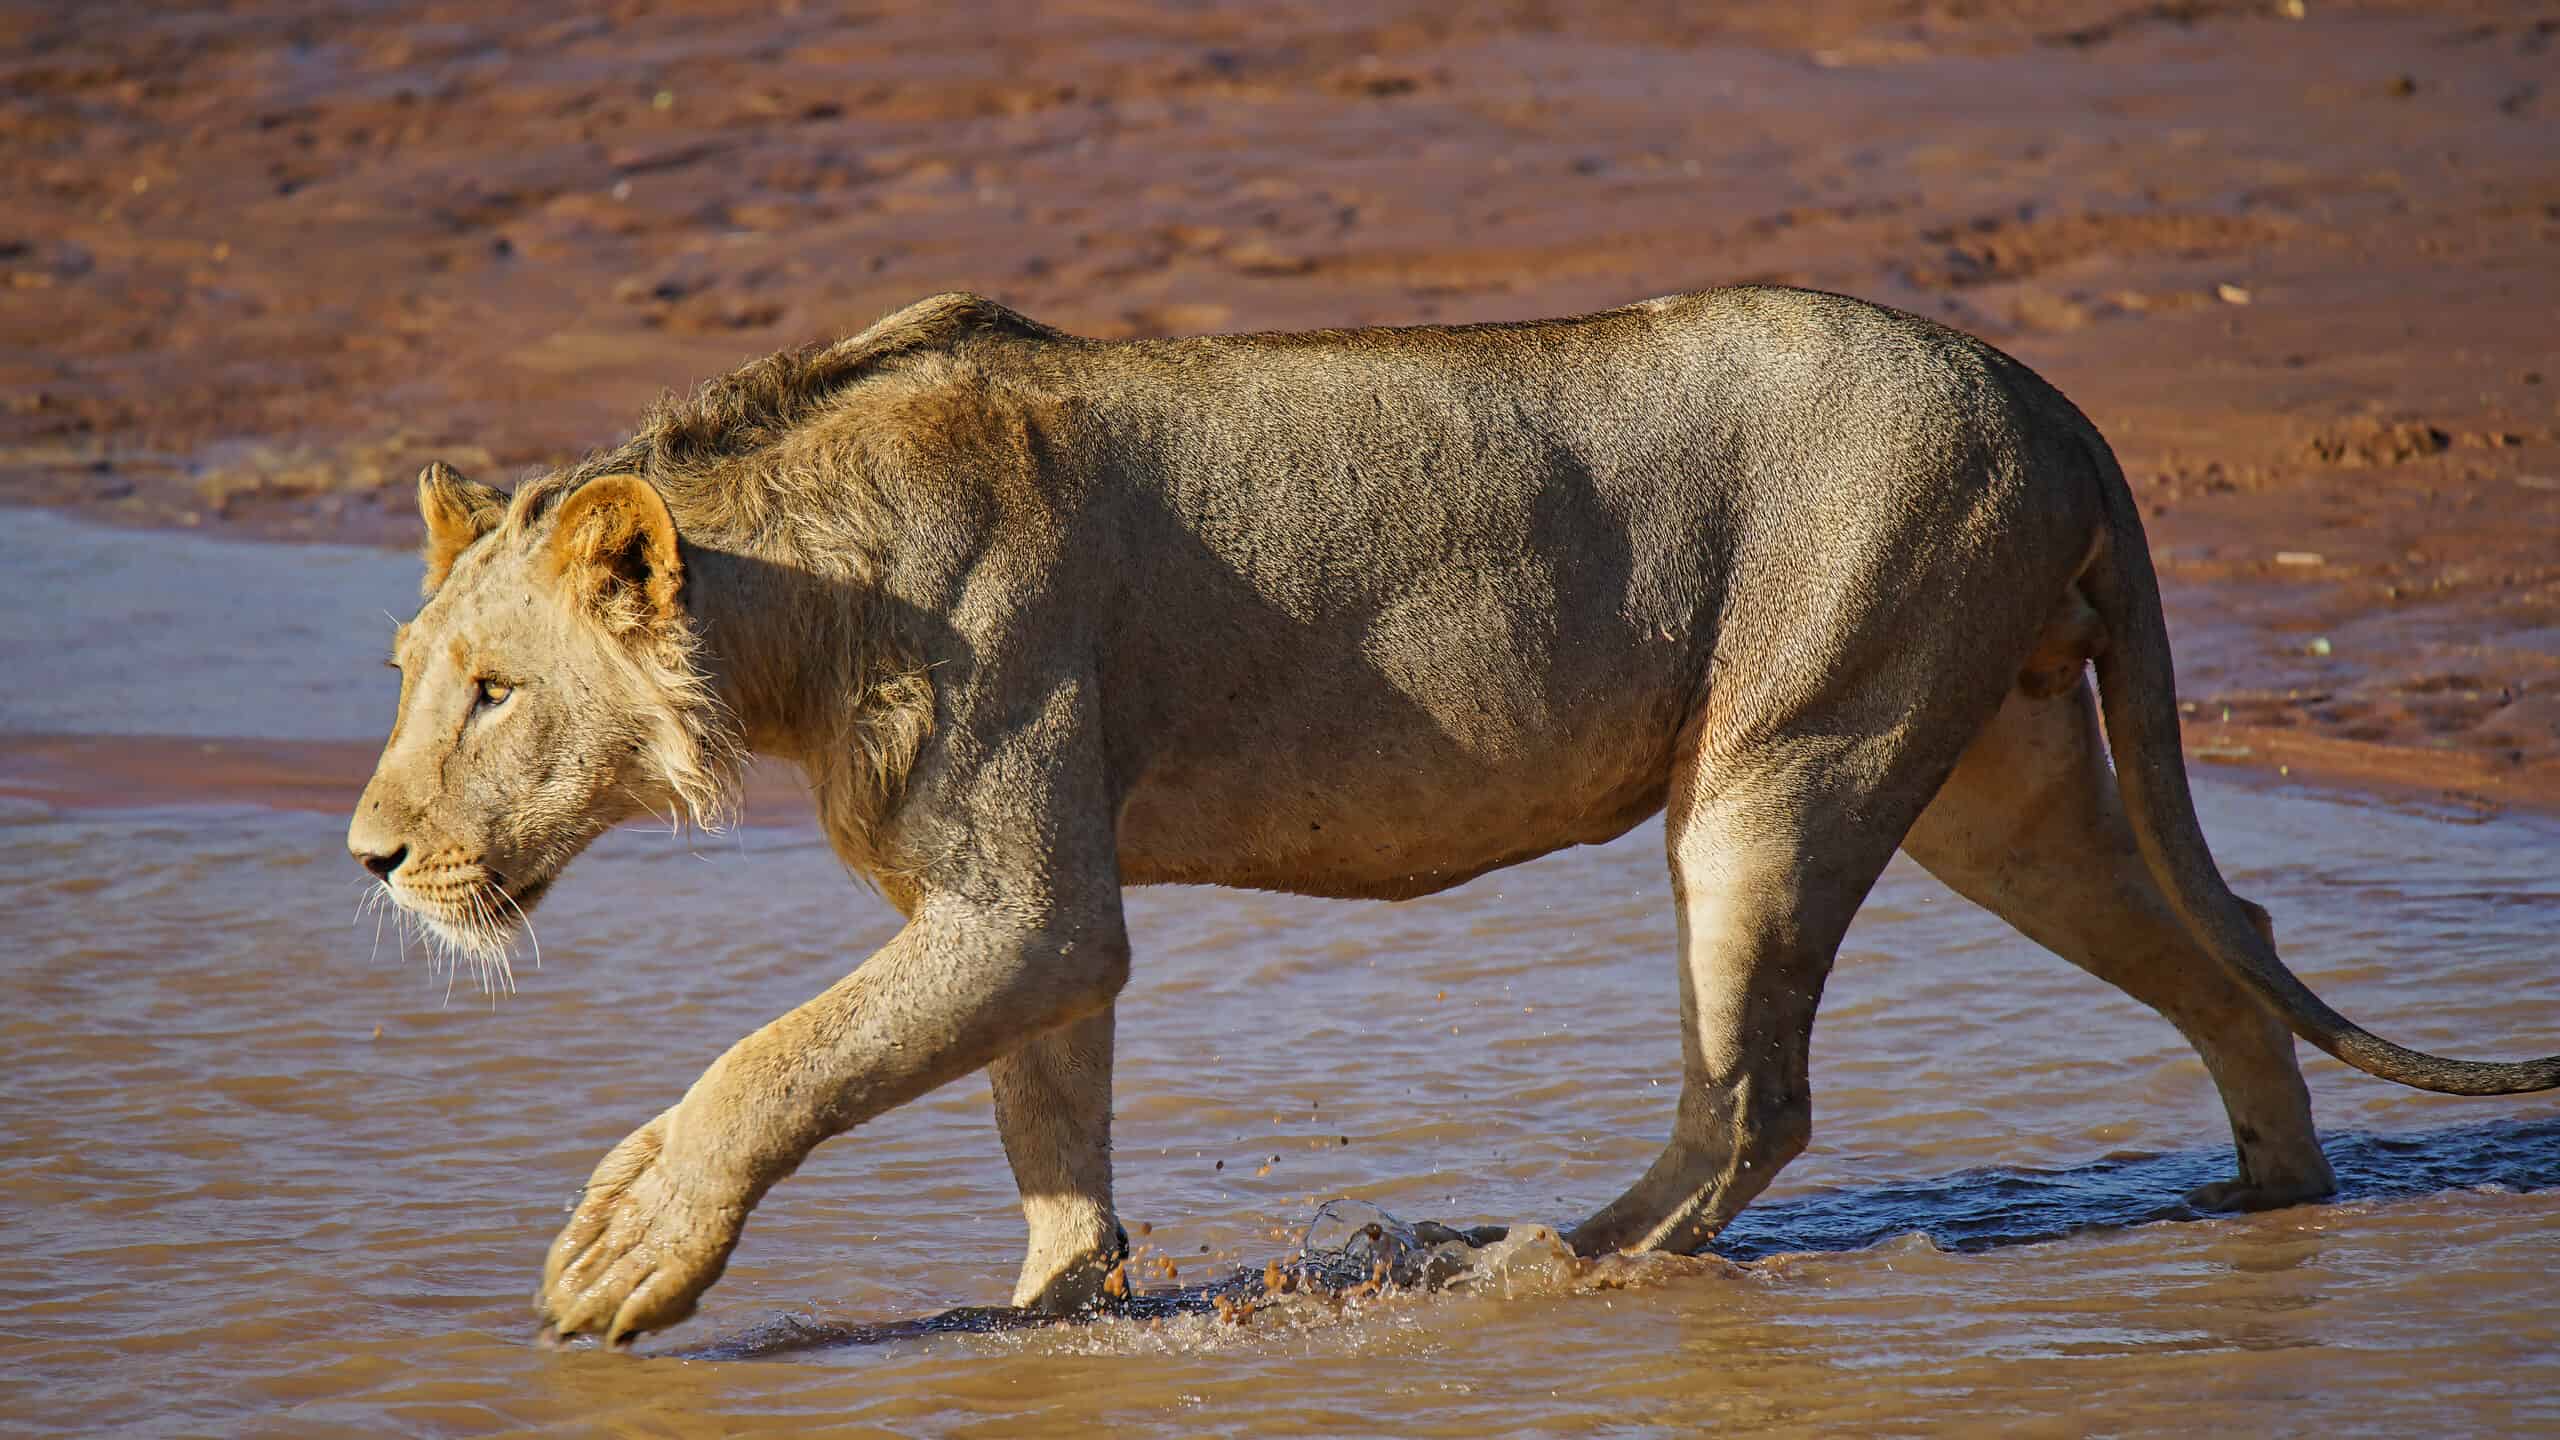 Lioness walking into water